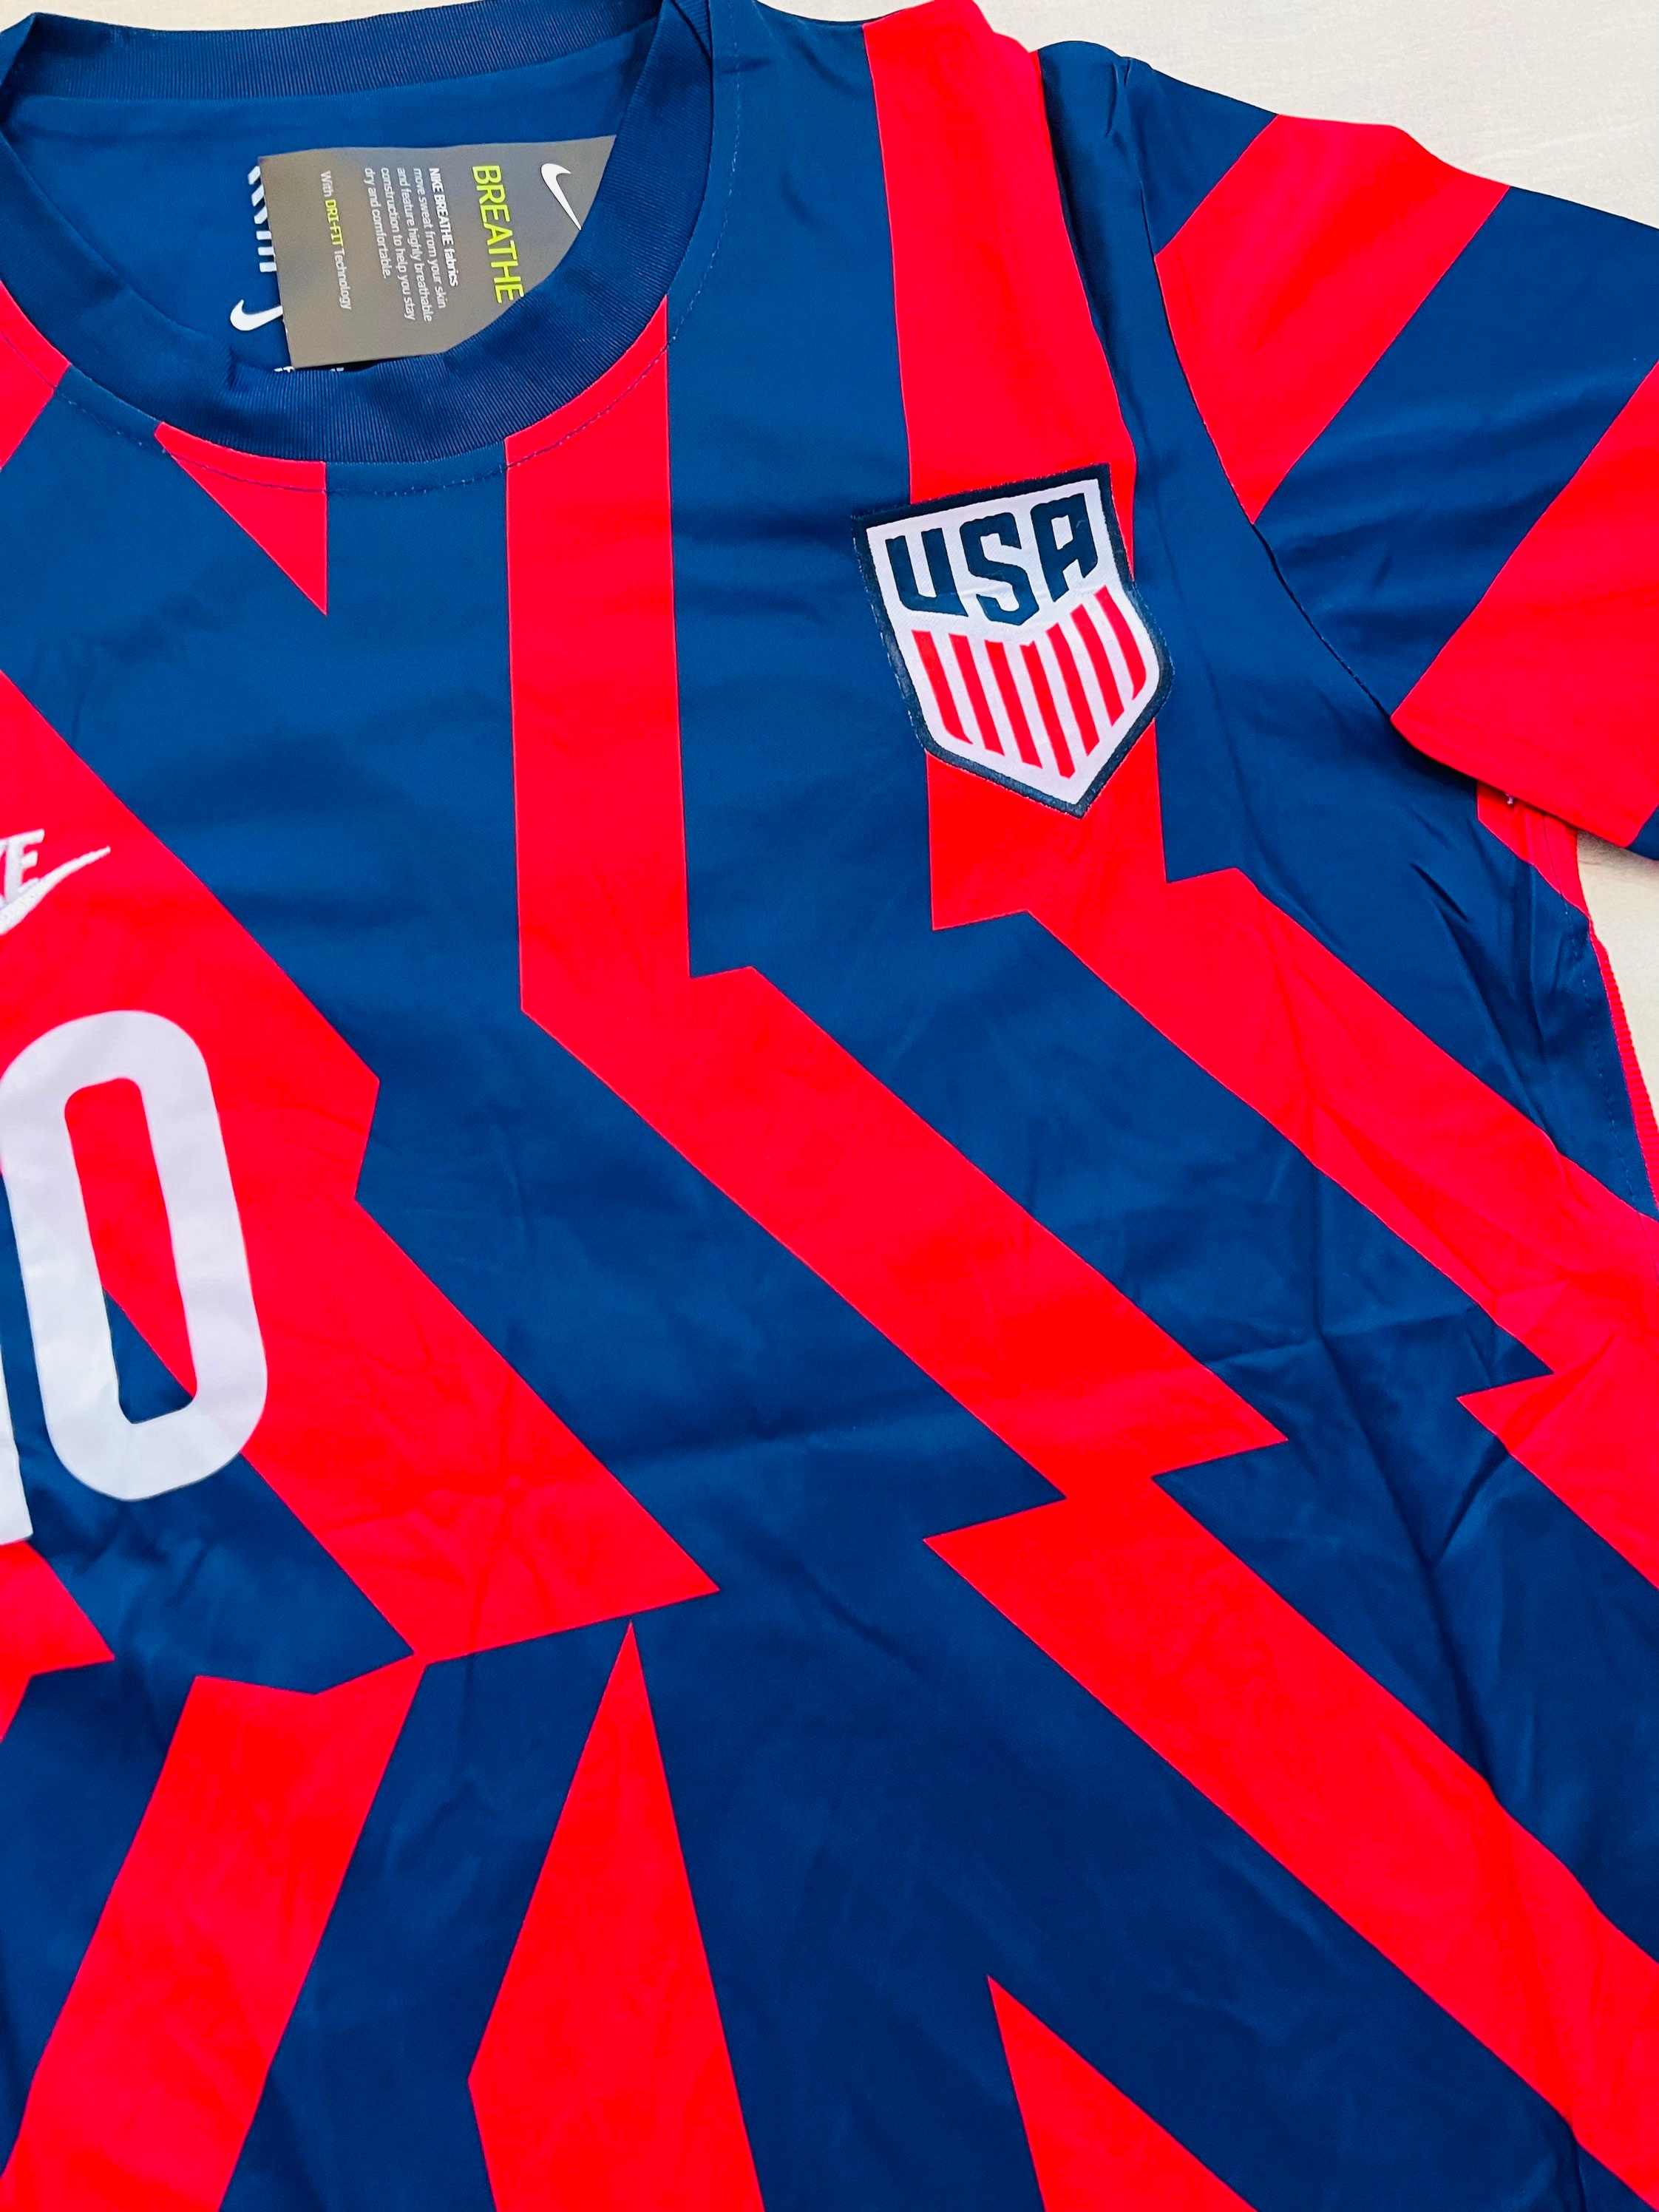 Pulisic 10 new USA soccer jersey 21/22 | Etsy